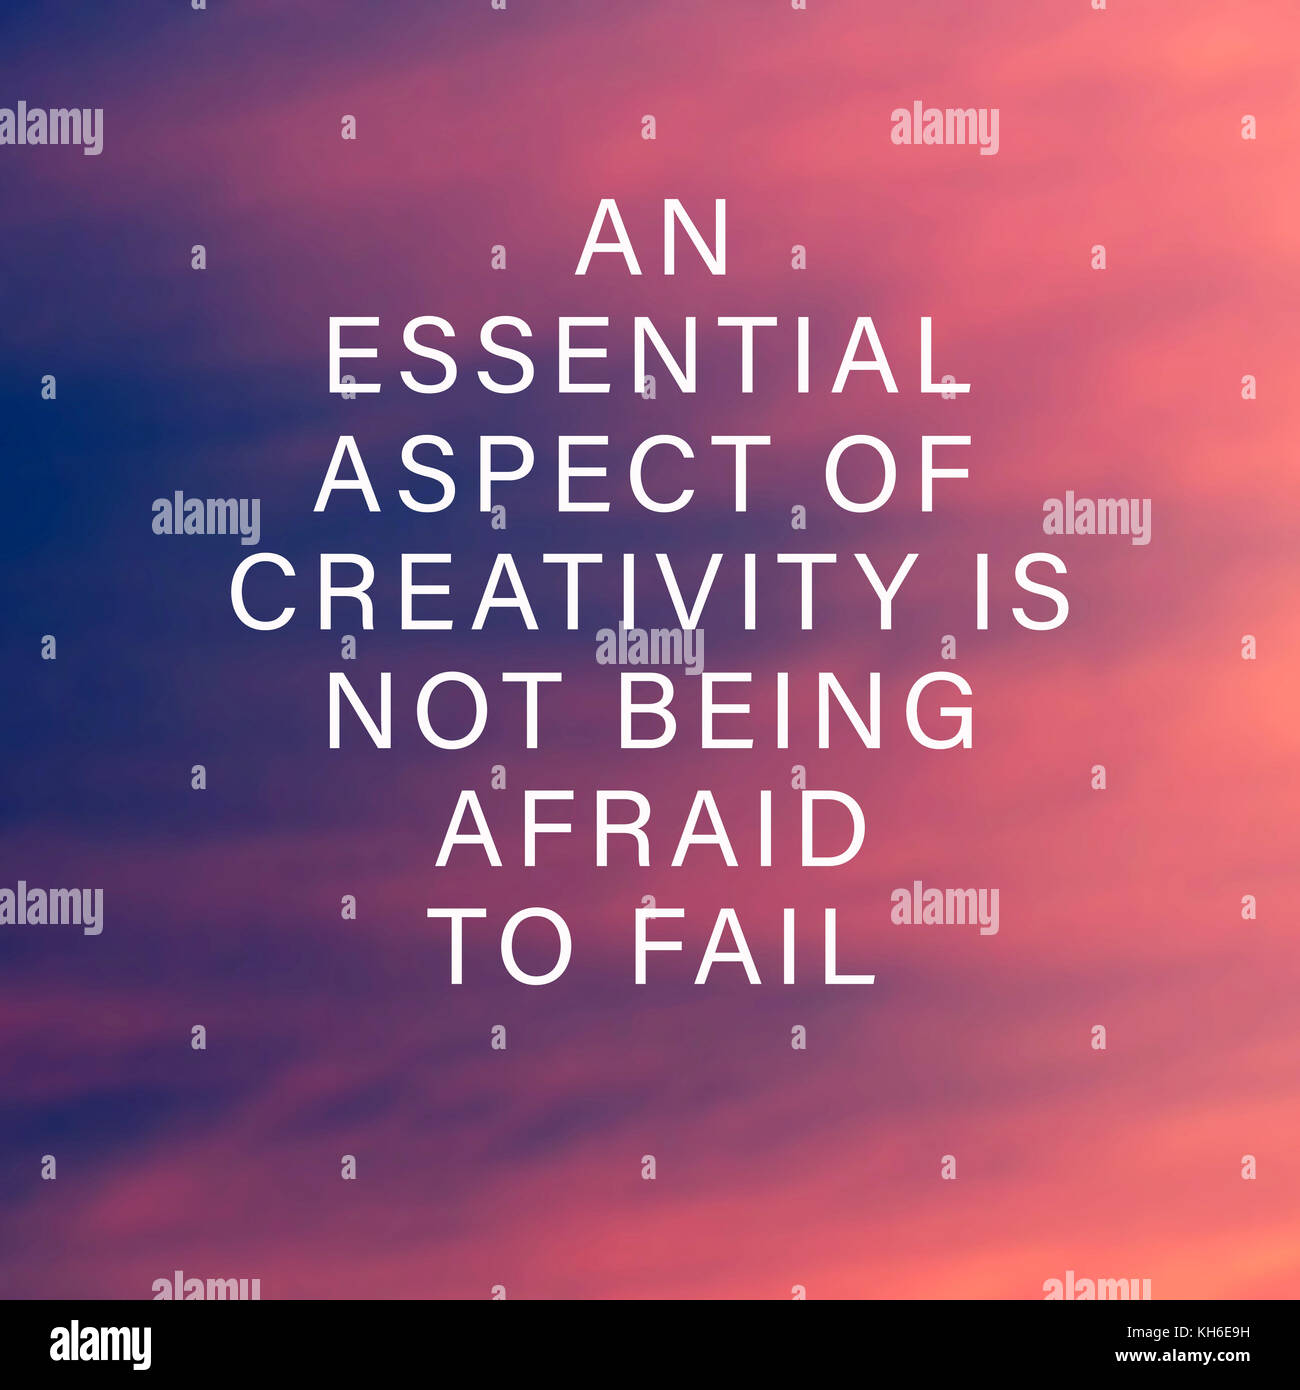 Life Inspirational And Motivational Quotes - As Essential Aspect of Creativity is Not Being Afraid to Fail Stock Photo